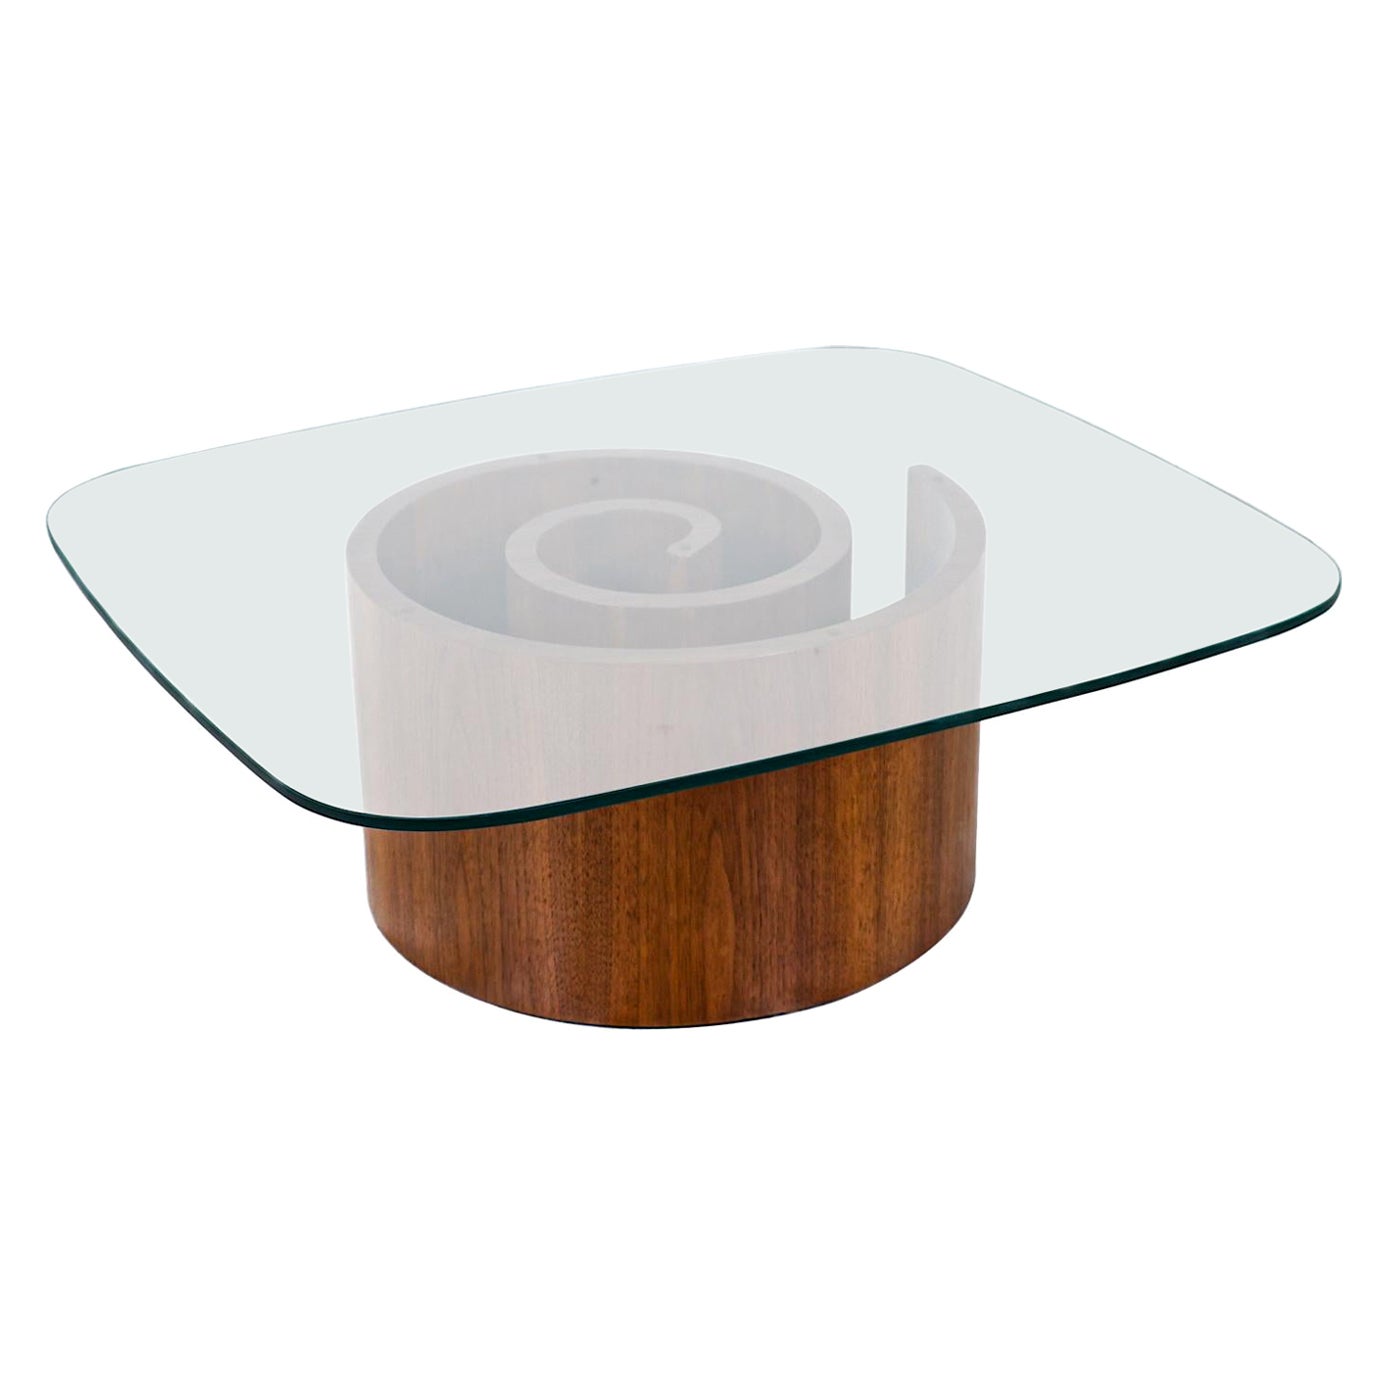 Vladimir Kagan Sculptural “Snail” Coffee Table with Glass Top for Selig